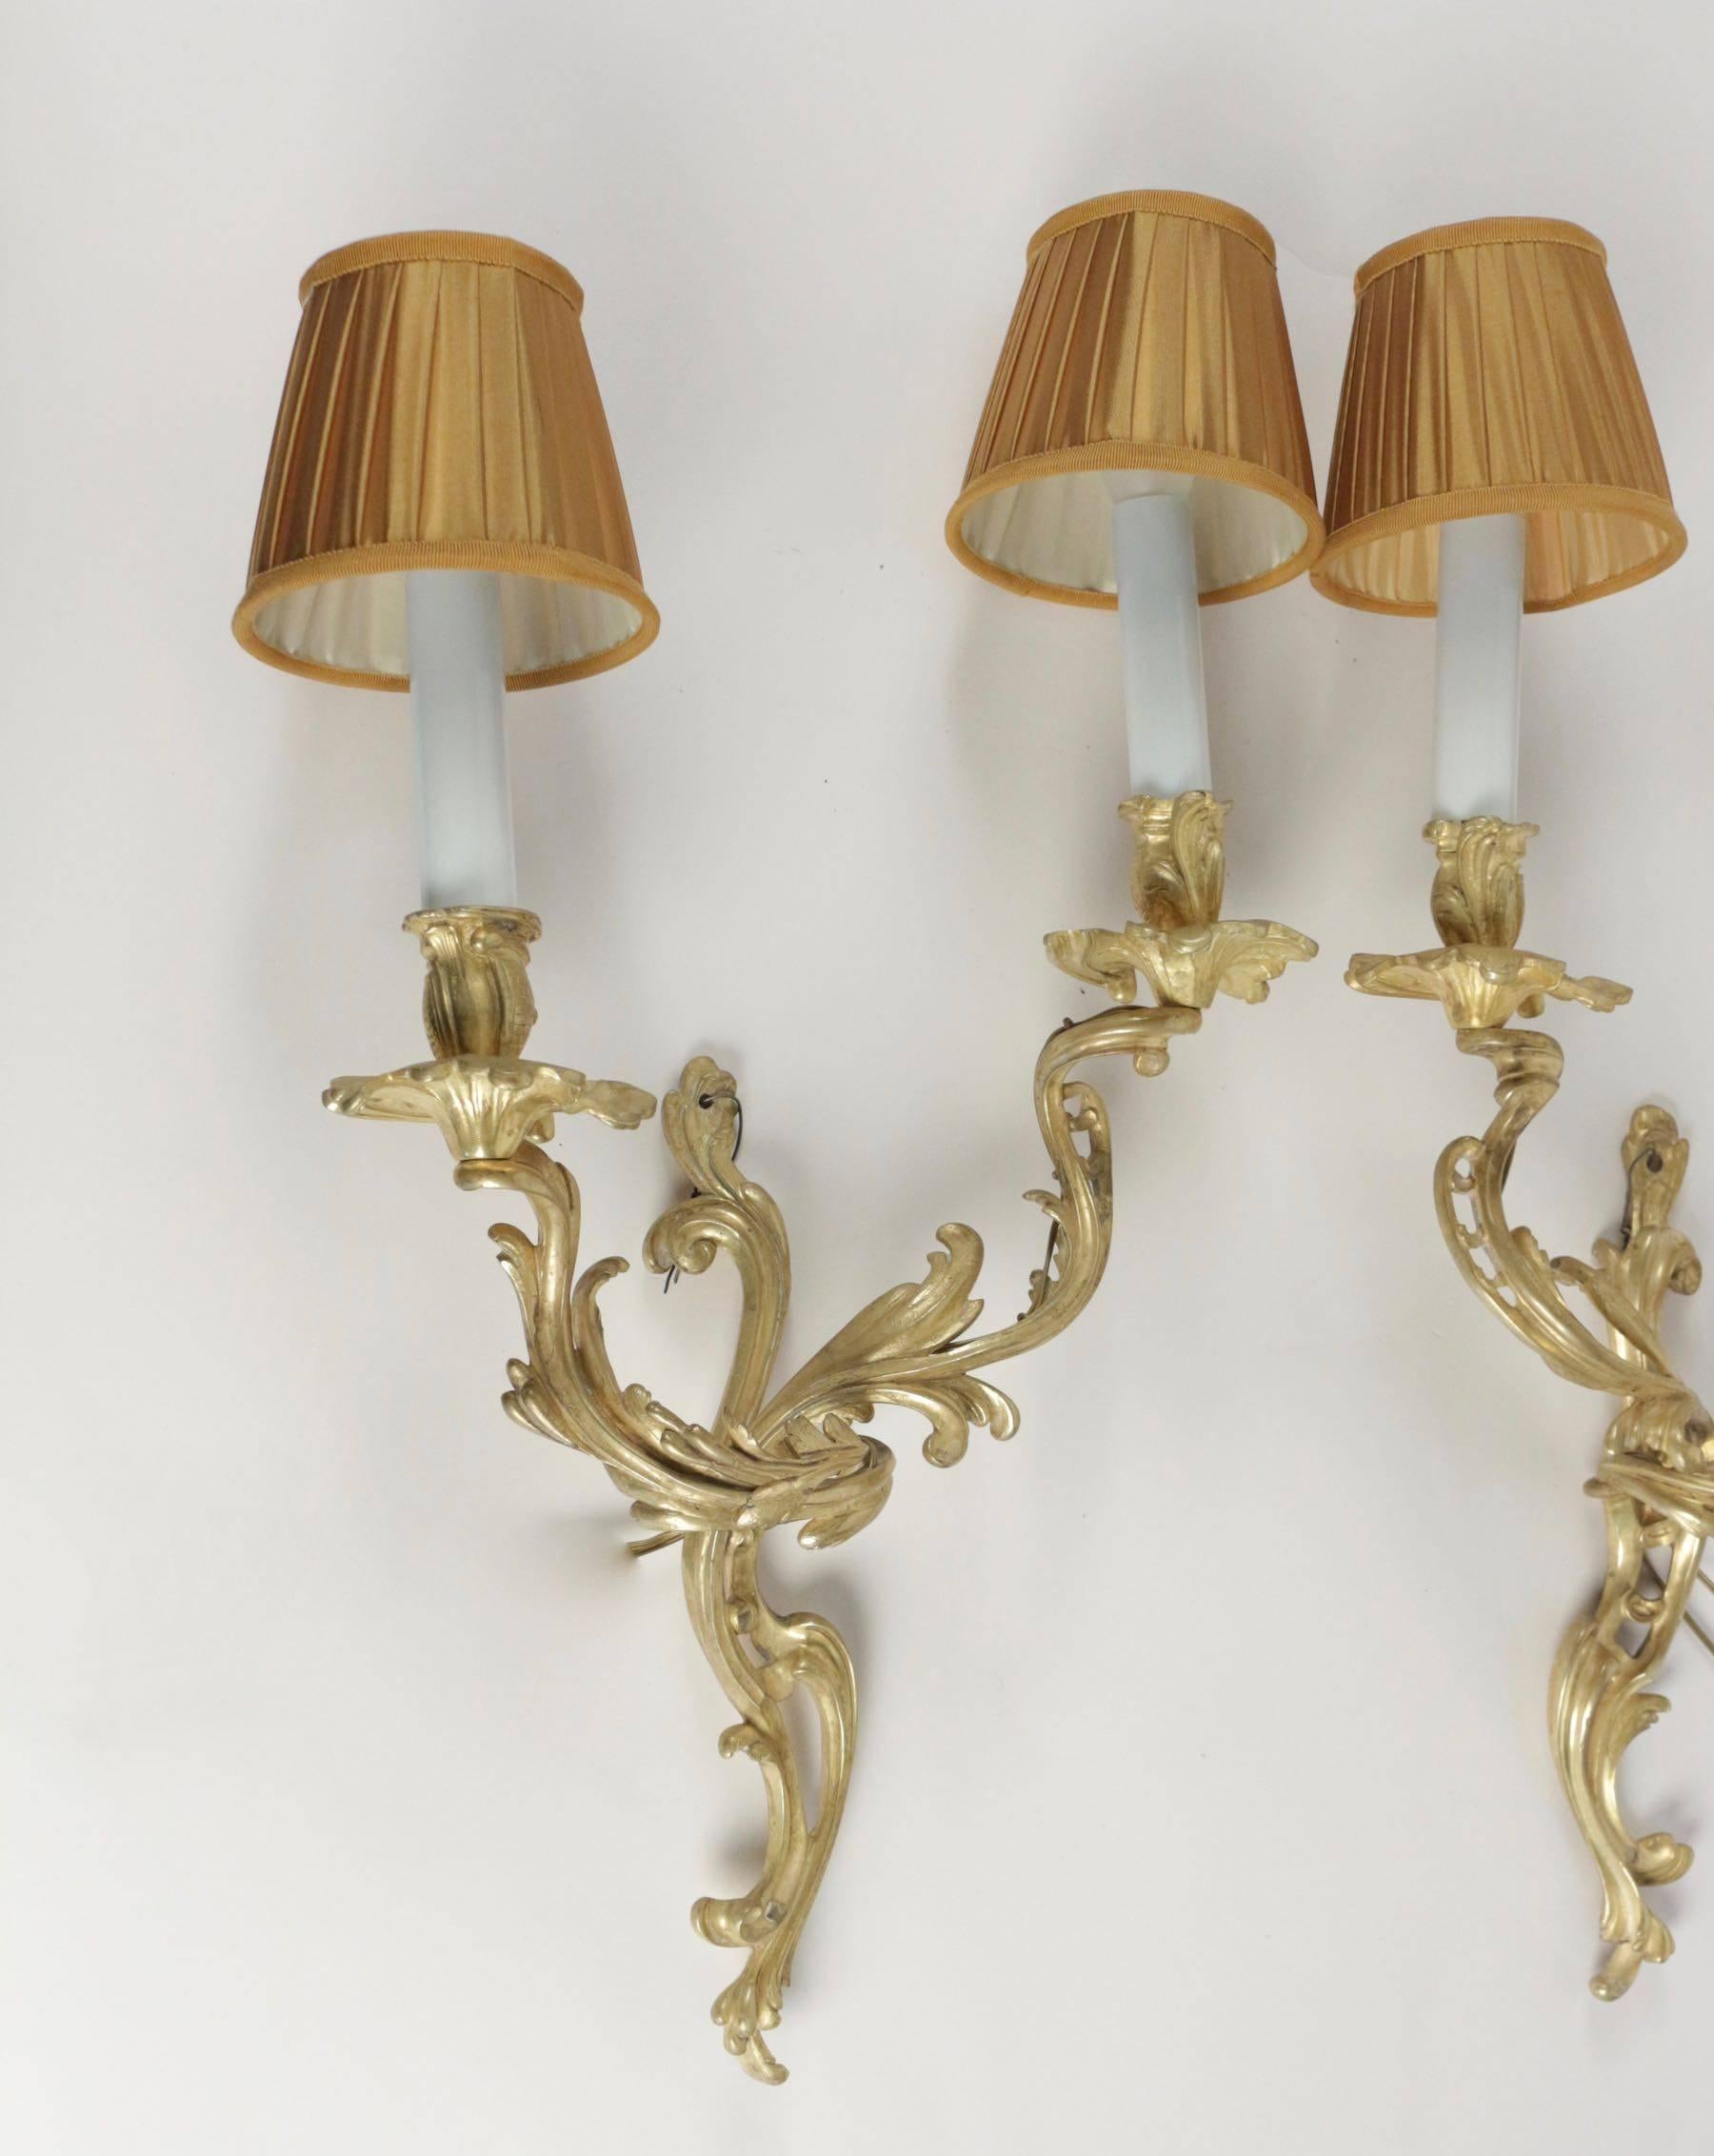 The pair of bronze doré sconces in the style of Louis XV from the 19th century. Candlestick in opaline porcelain, antique style Louis XV.